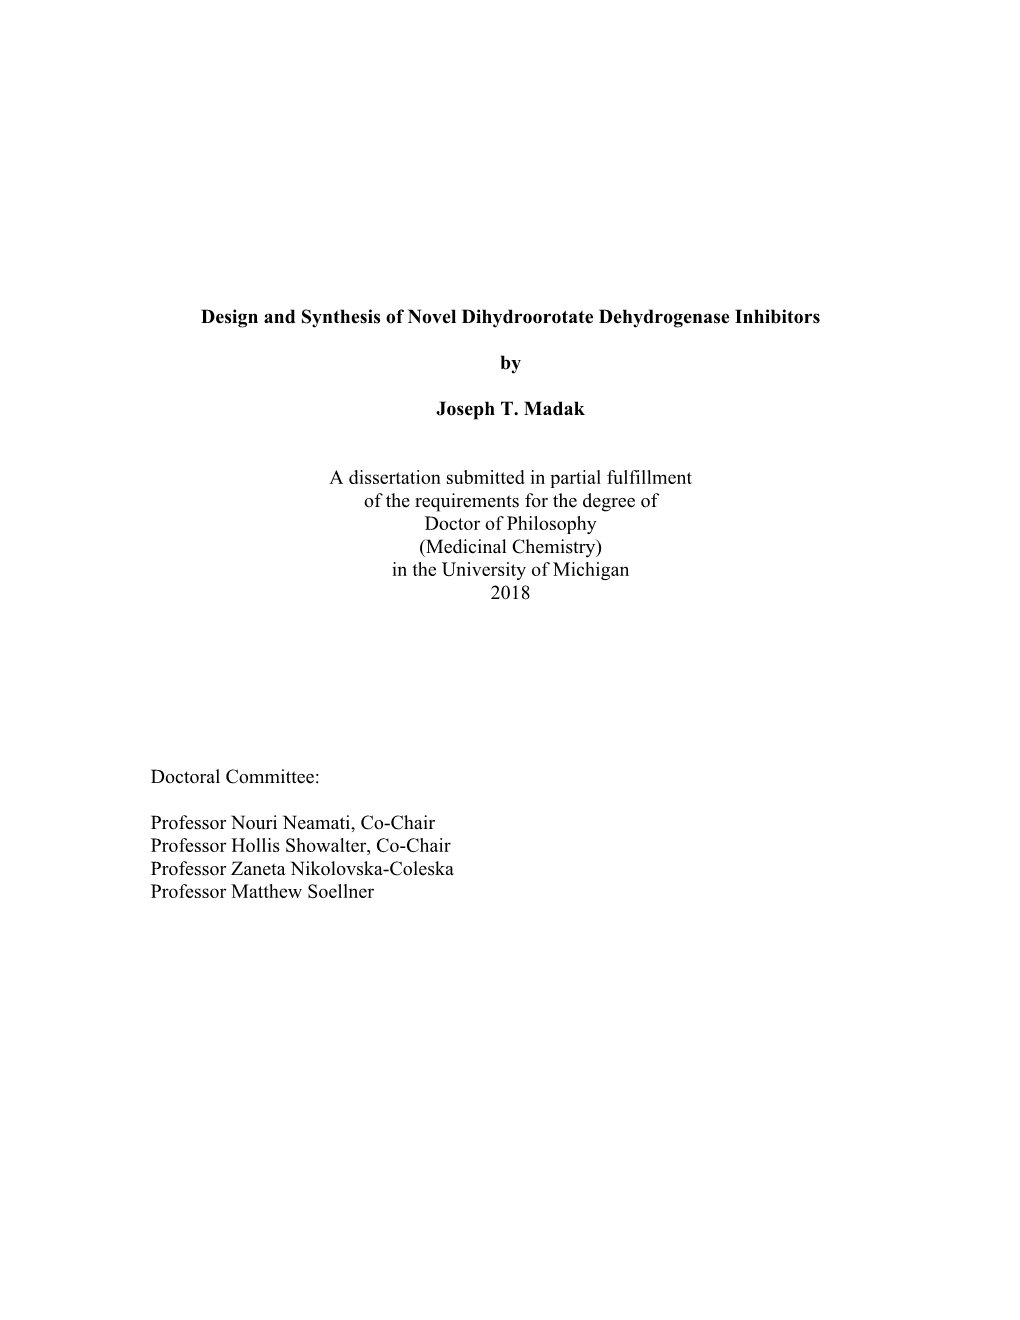 Design and Synthesis of Novel Dihydroorotate Dehydrogenase Inhibitors by Joseph T. Madak a Dissertation Submitted in Partial